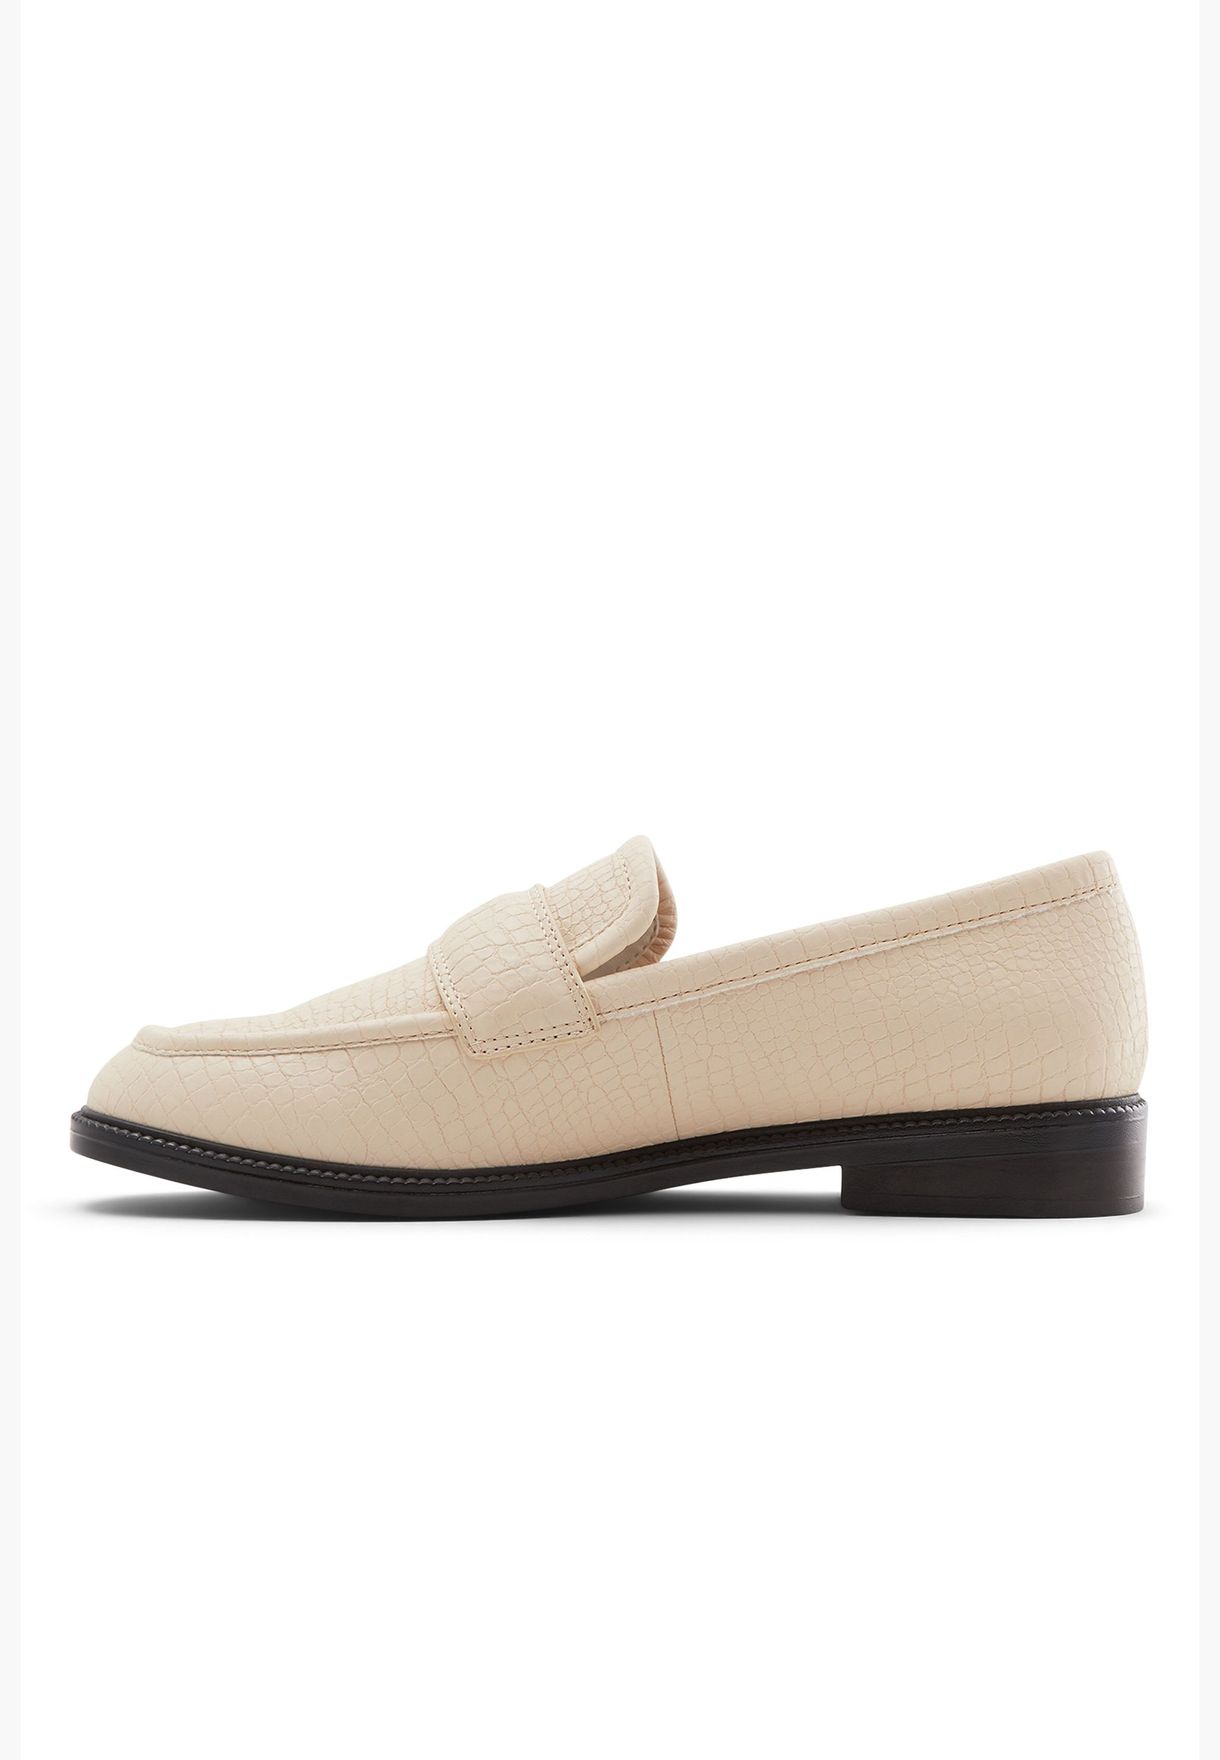 Transform Loafers